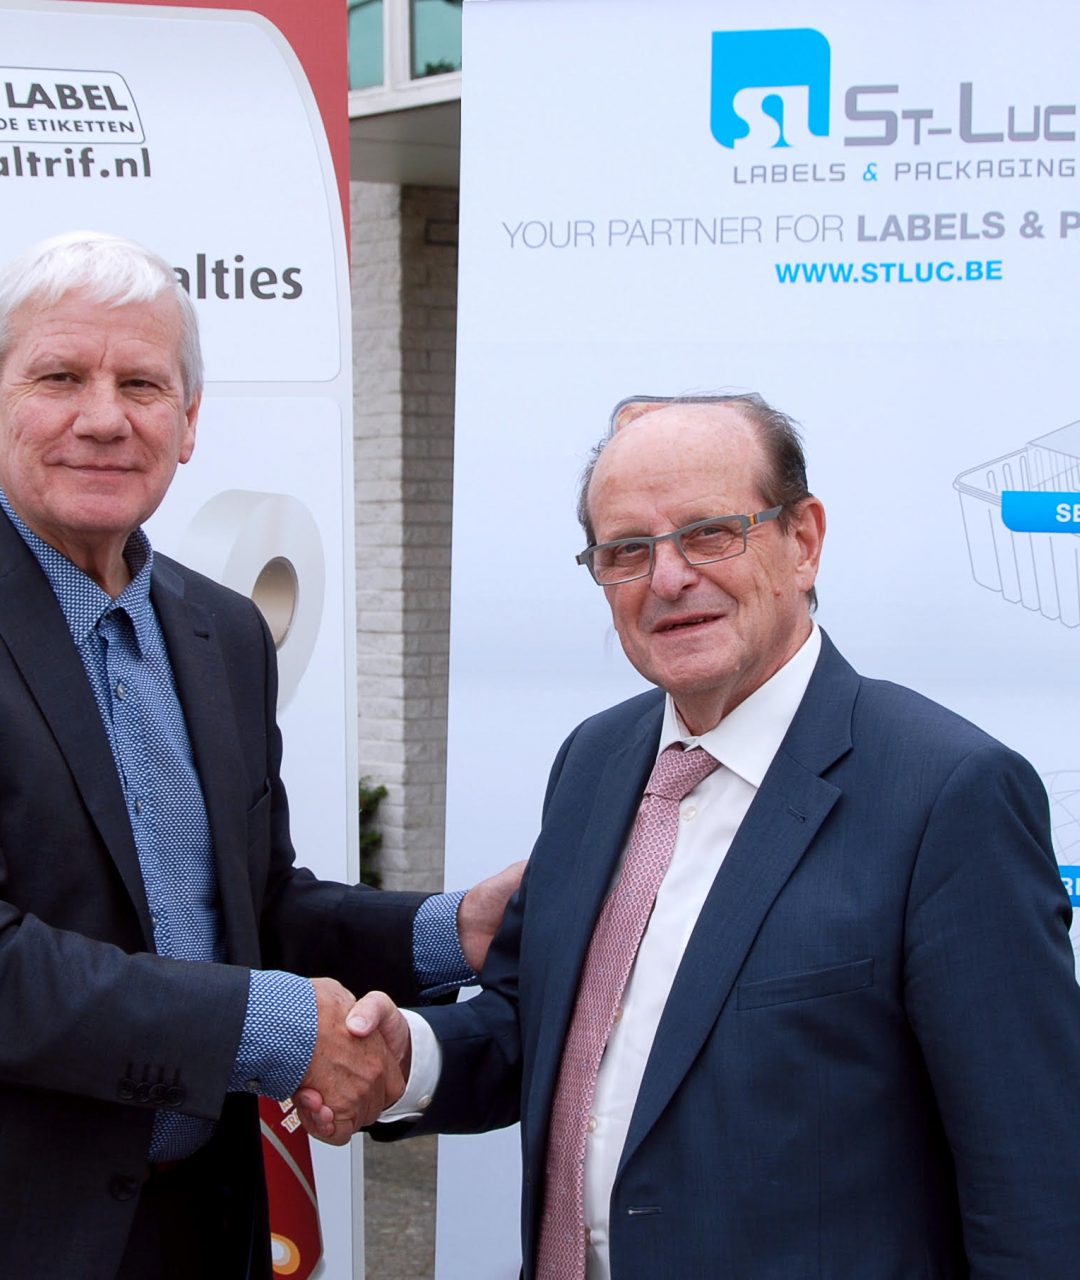 St-Luc Labels & Packaging neemt Altrif Label over